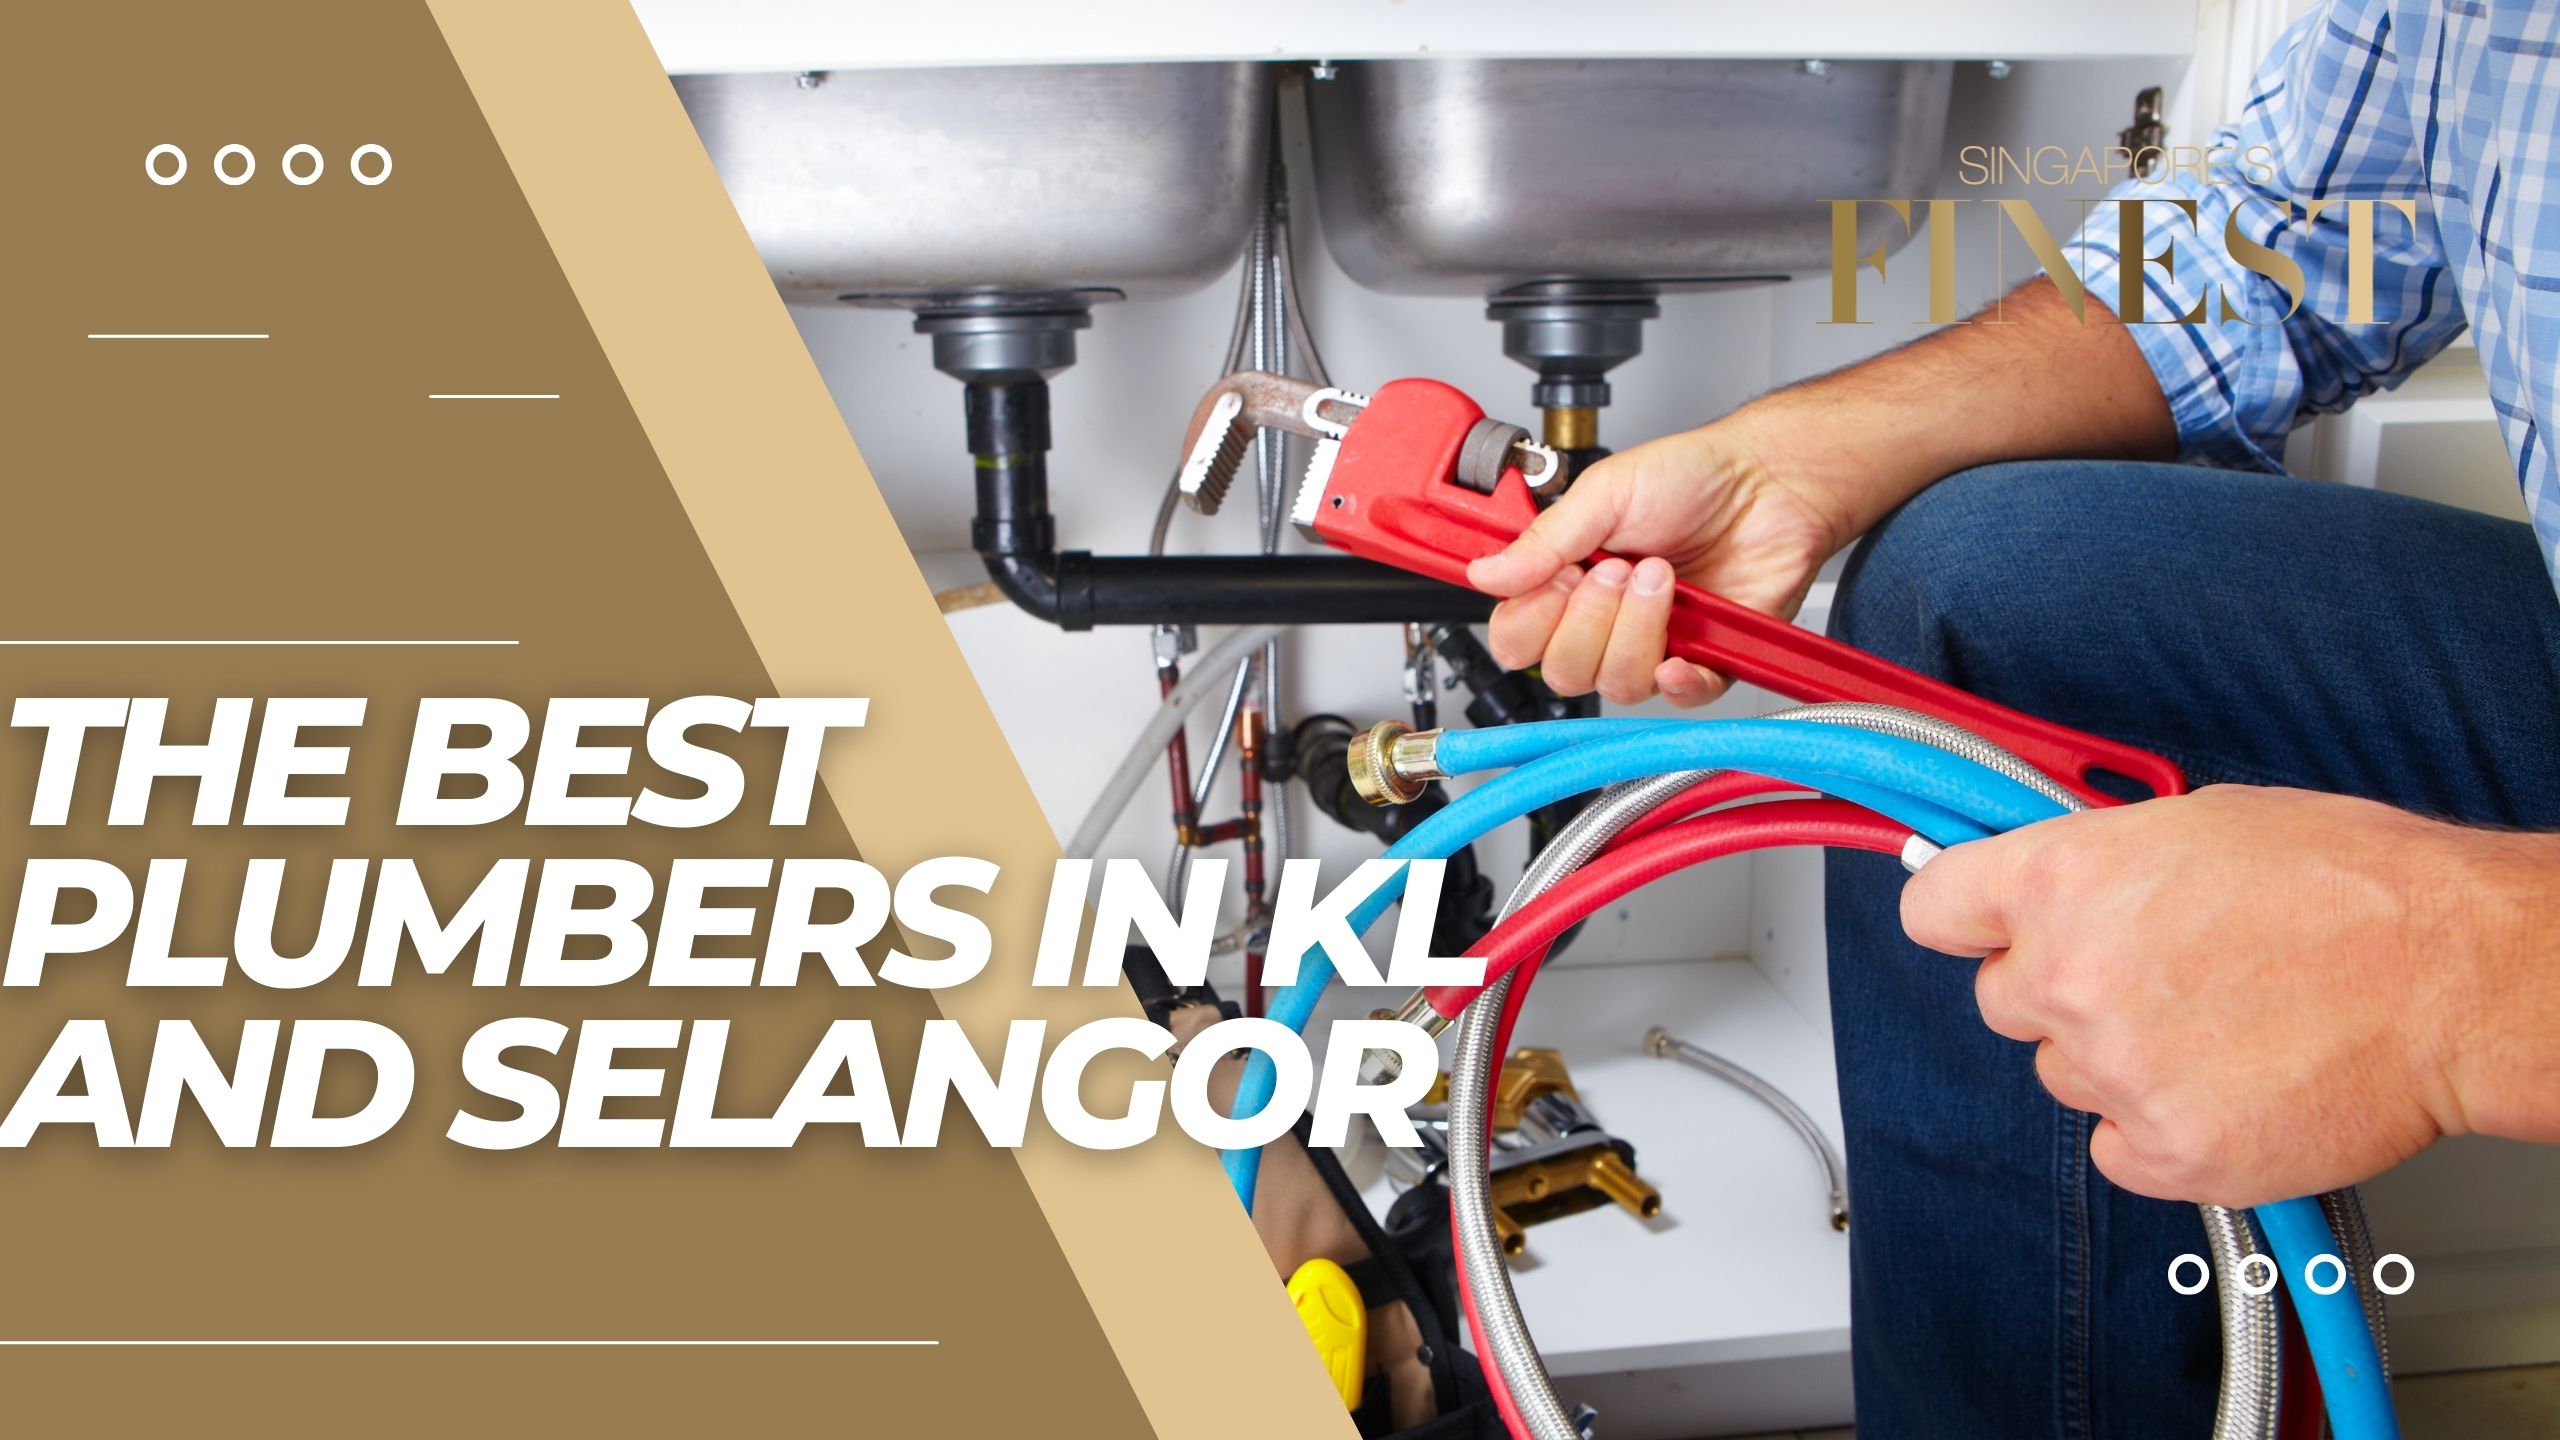 The Finest Plumbers in KL and Selangor